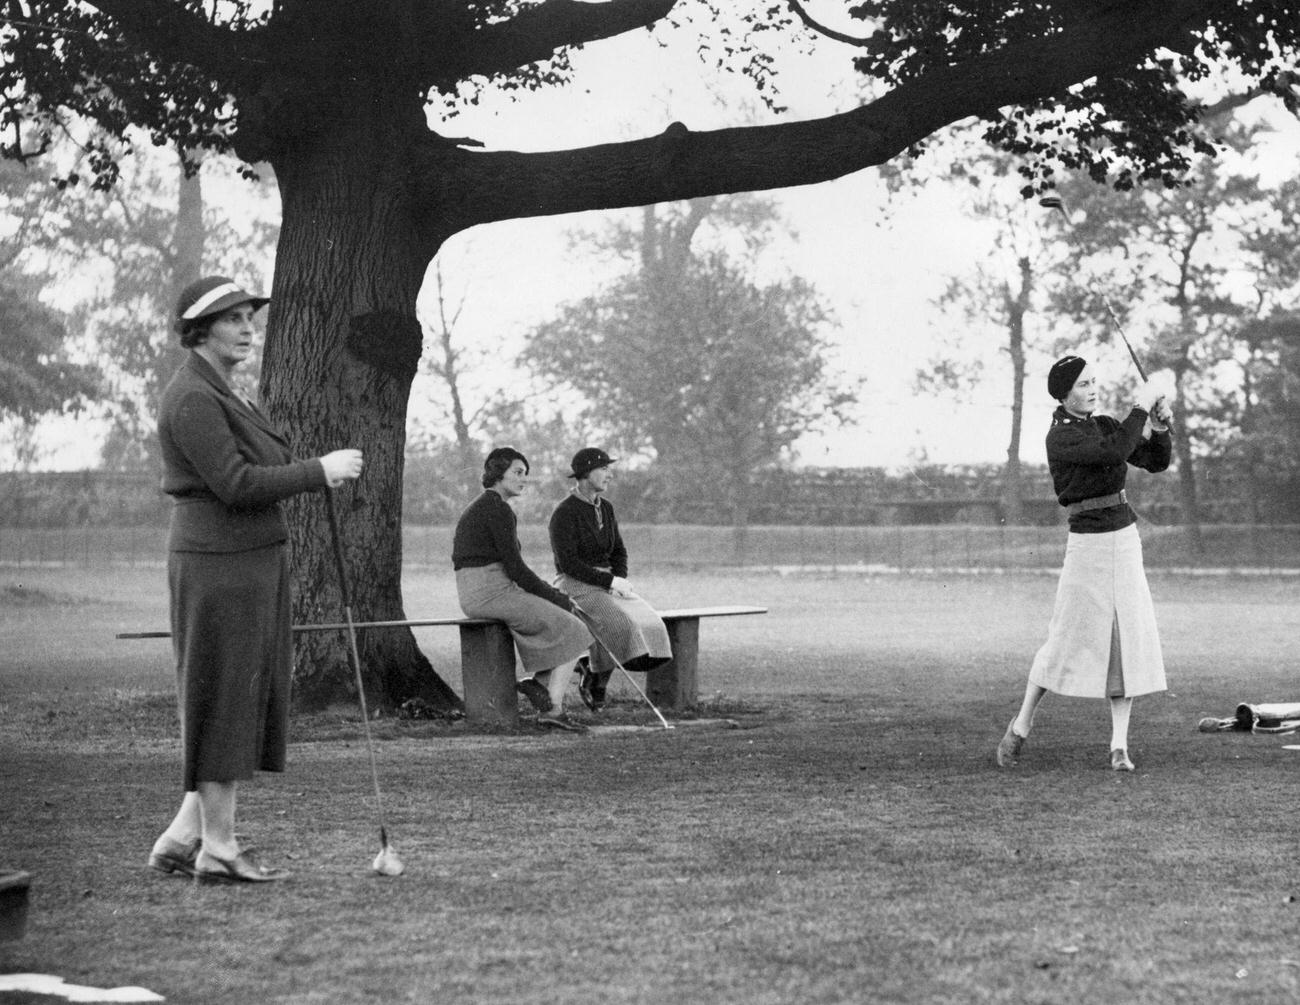 Mrs. Ian Waters at Autumn Foursomes, Ranelagh, October 6, 1936.